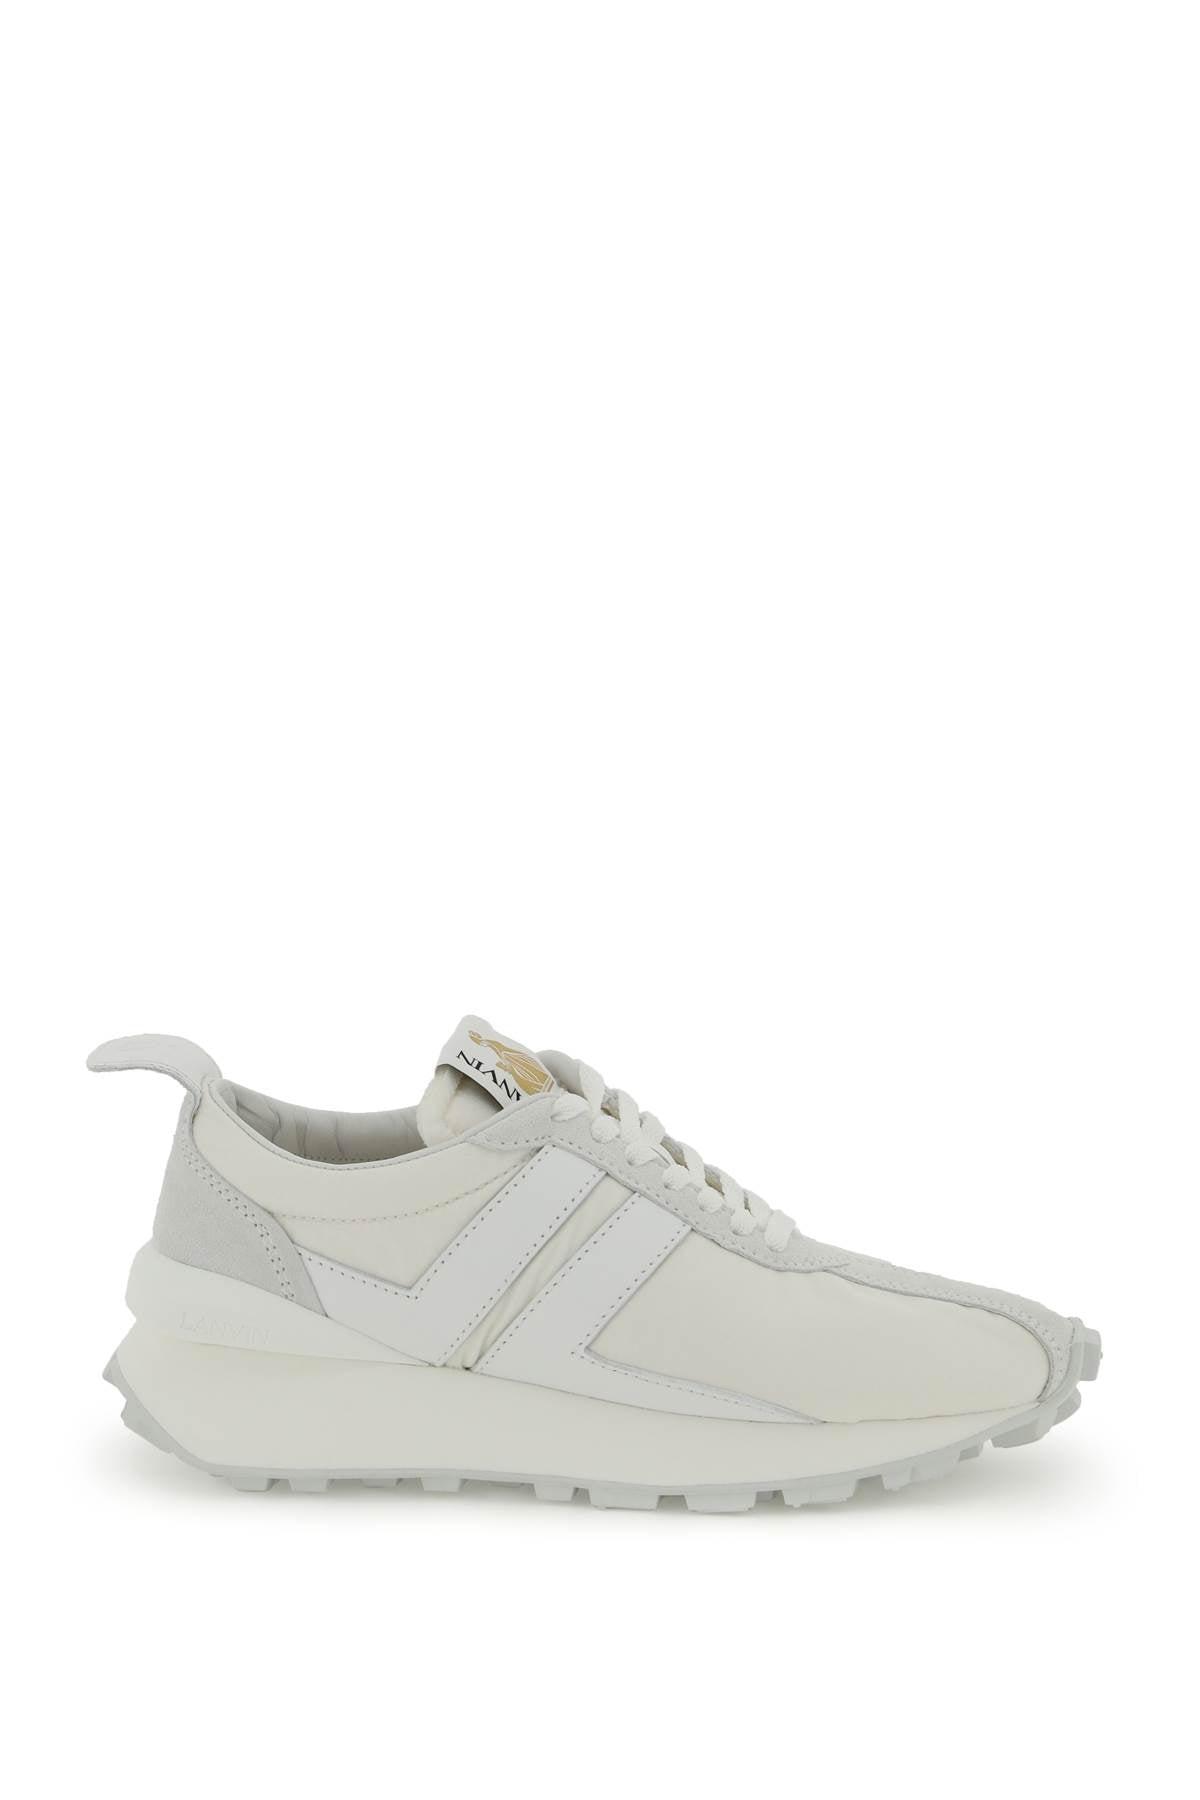 Lanvin Nylon And Leather Bumper Sneakers in White | Lyst